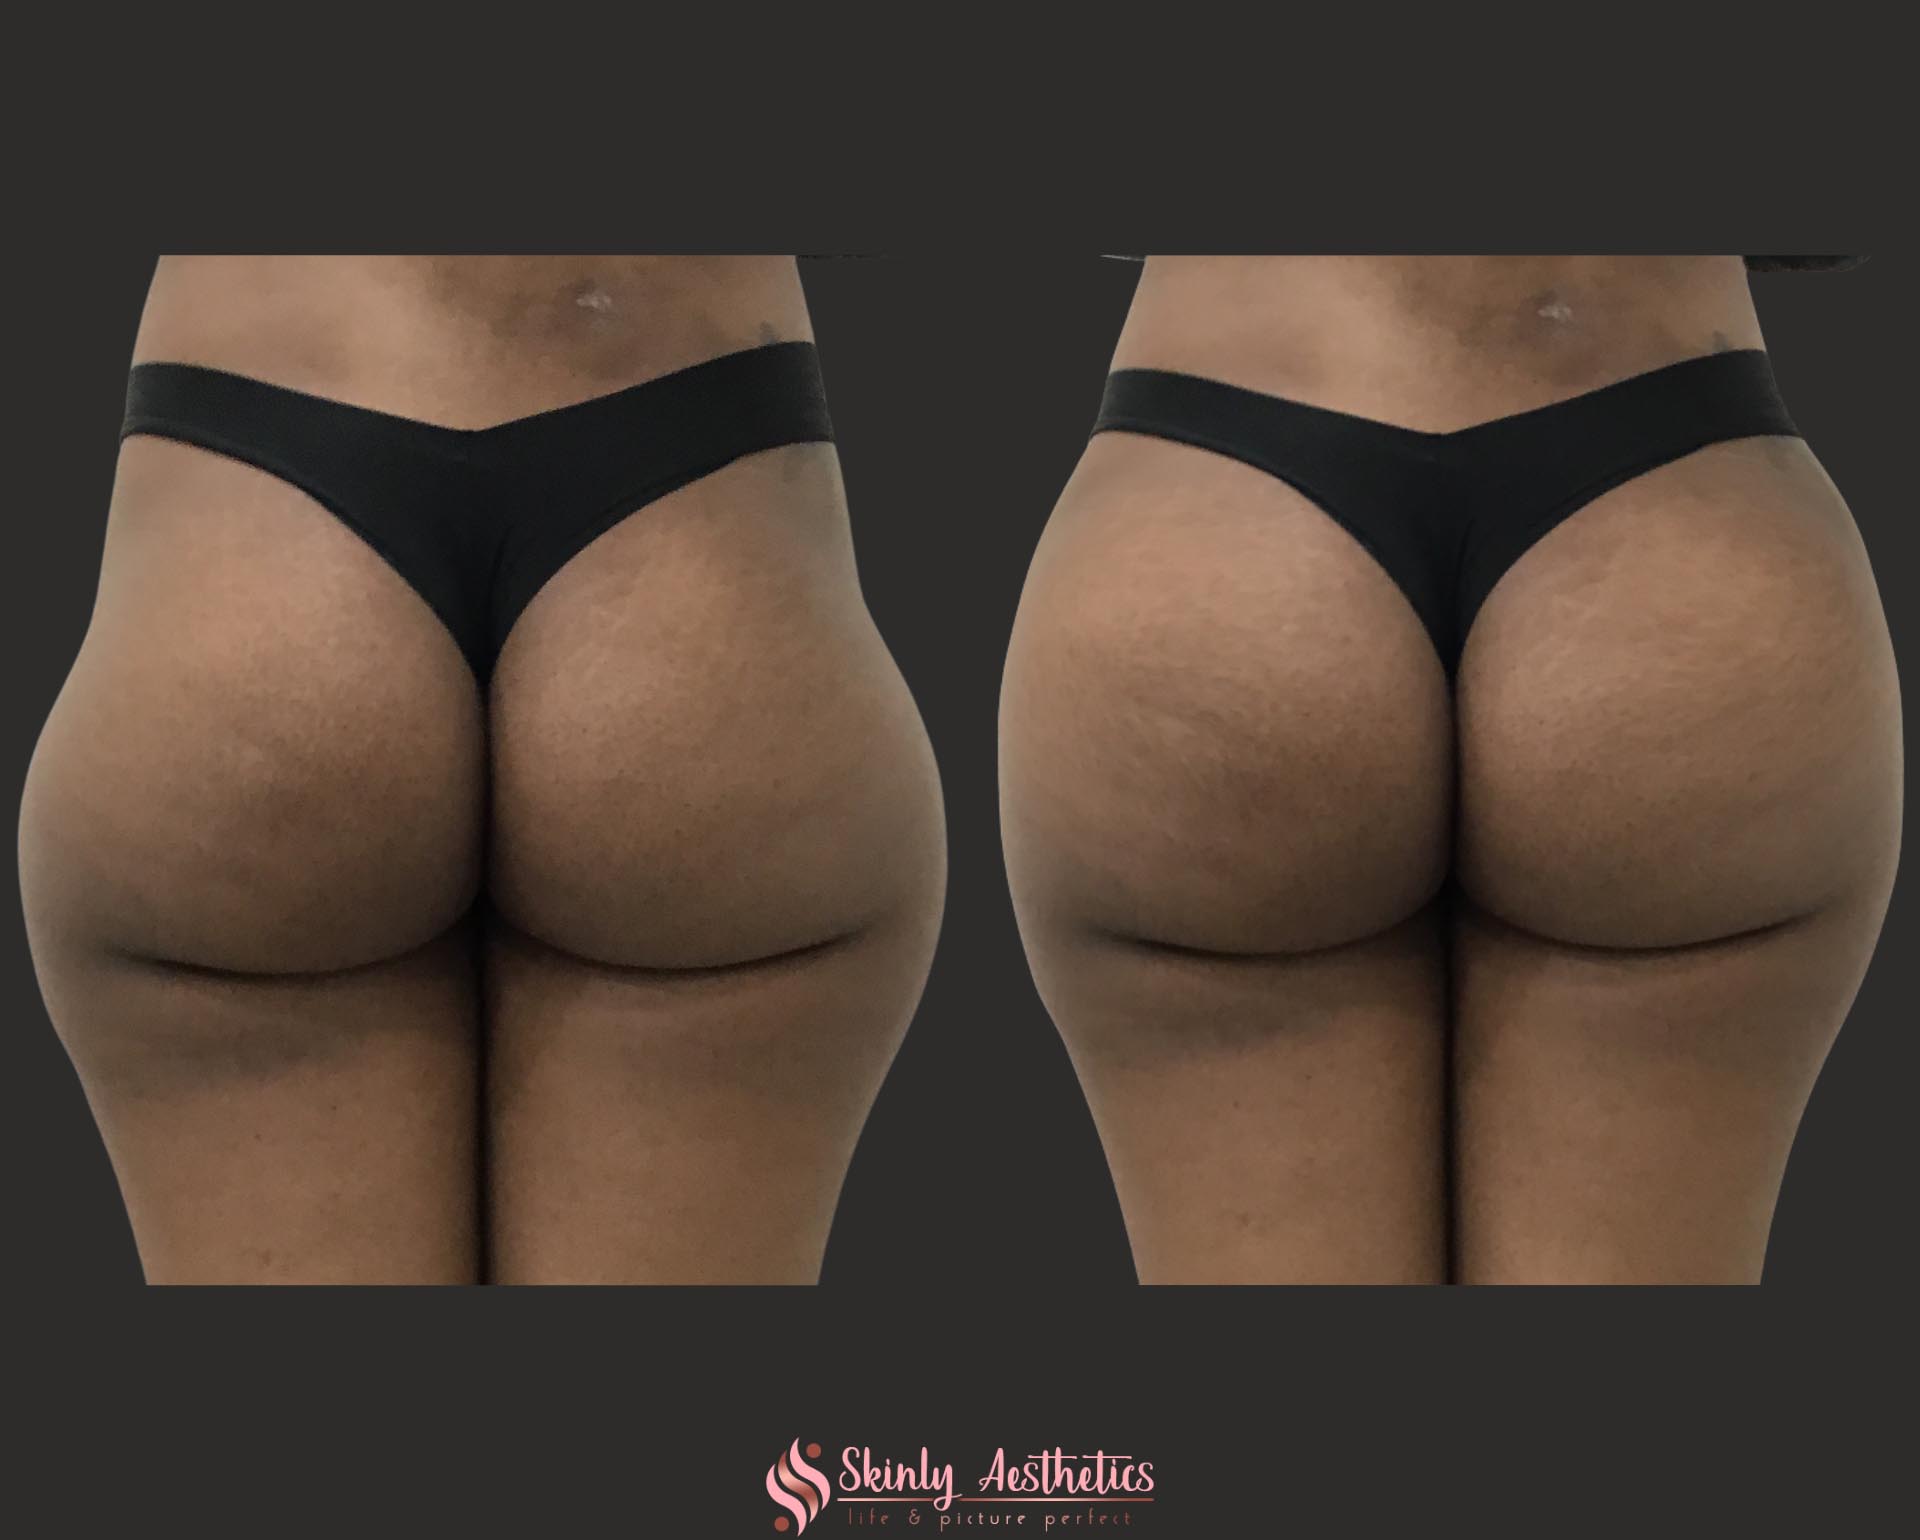 before and after results following correction of severe hip dip deformities with Sculptra and Radiesse fillers